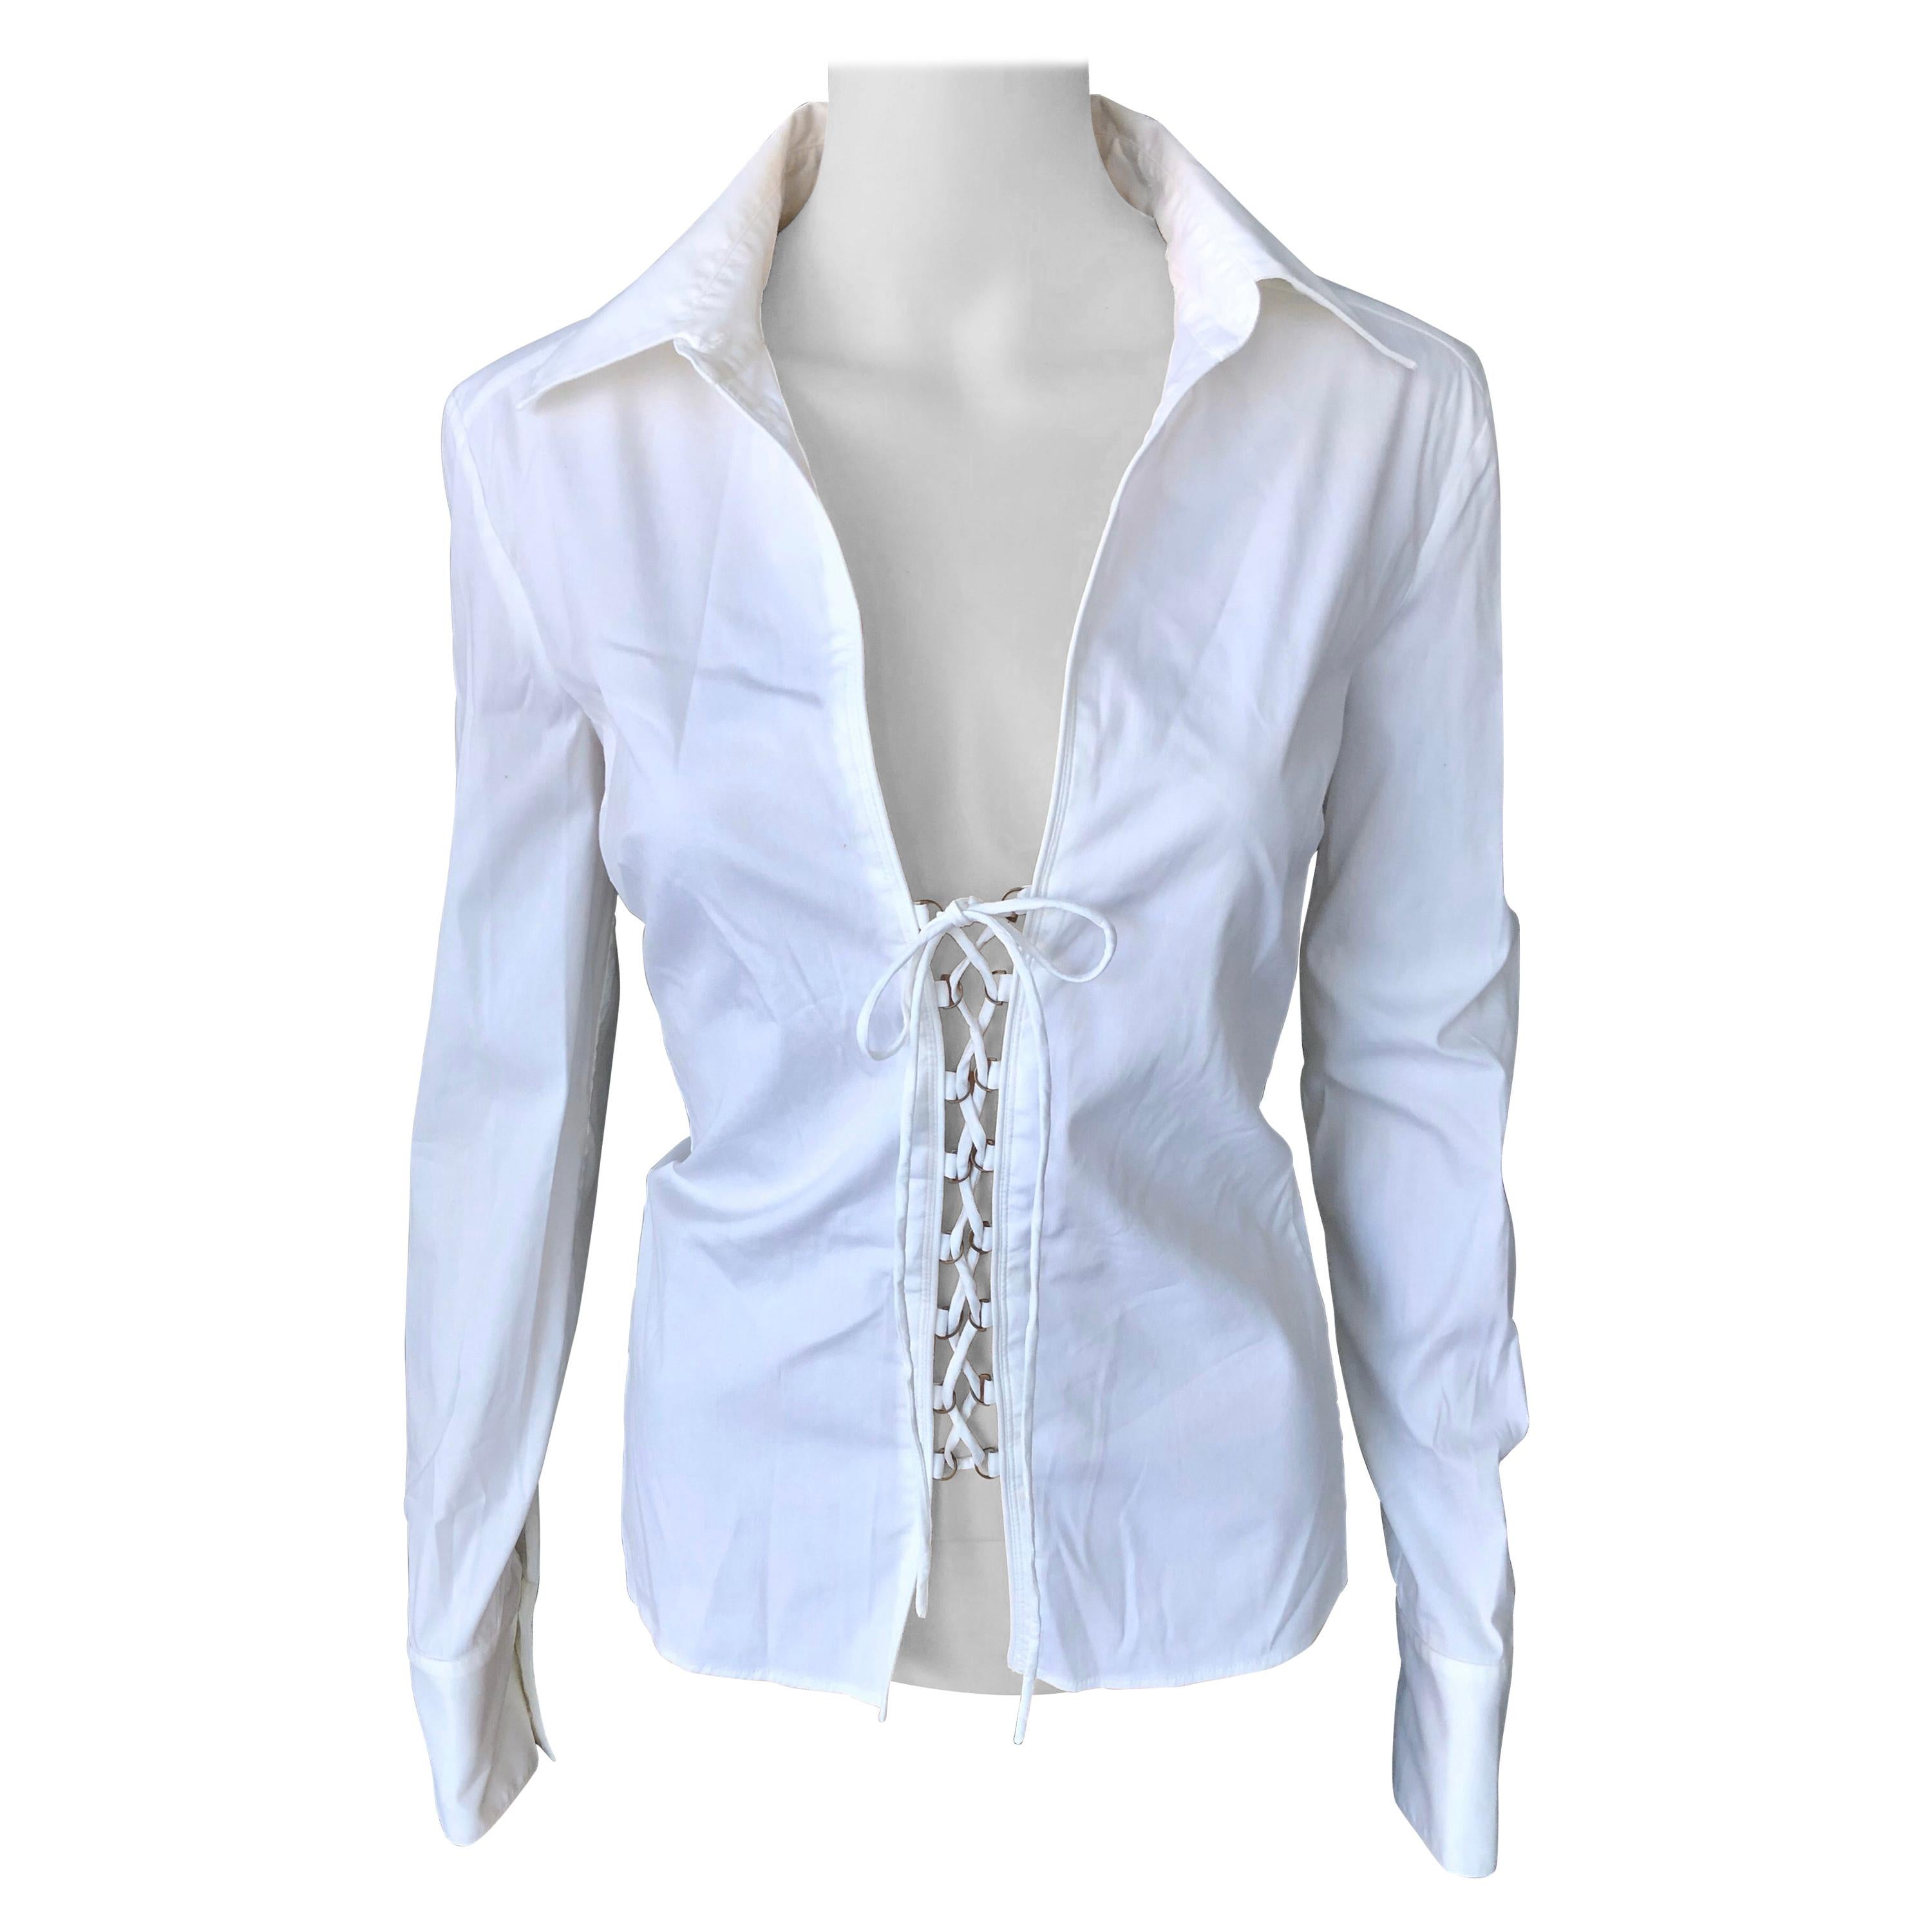 Tom Ford for Gucci S/S 2002 Lace-up White Top Shirt